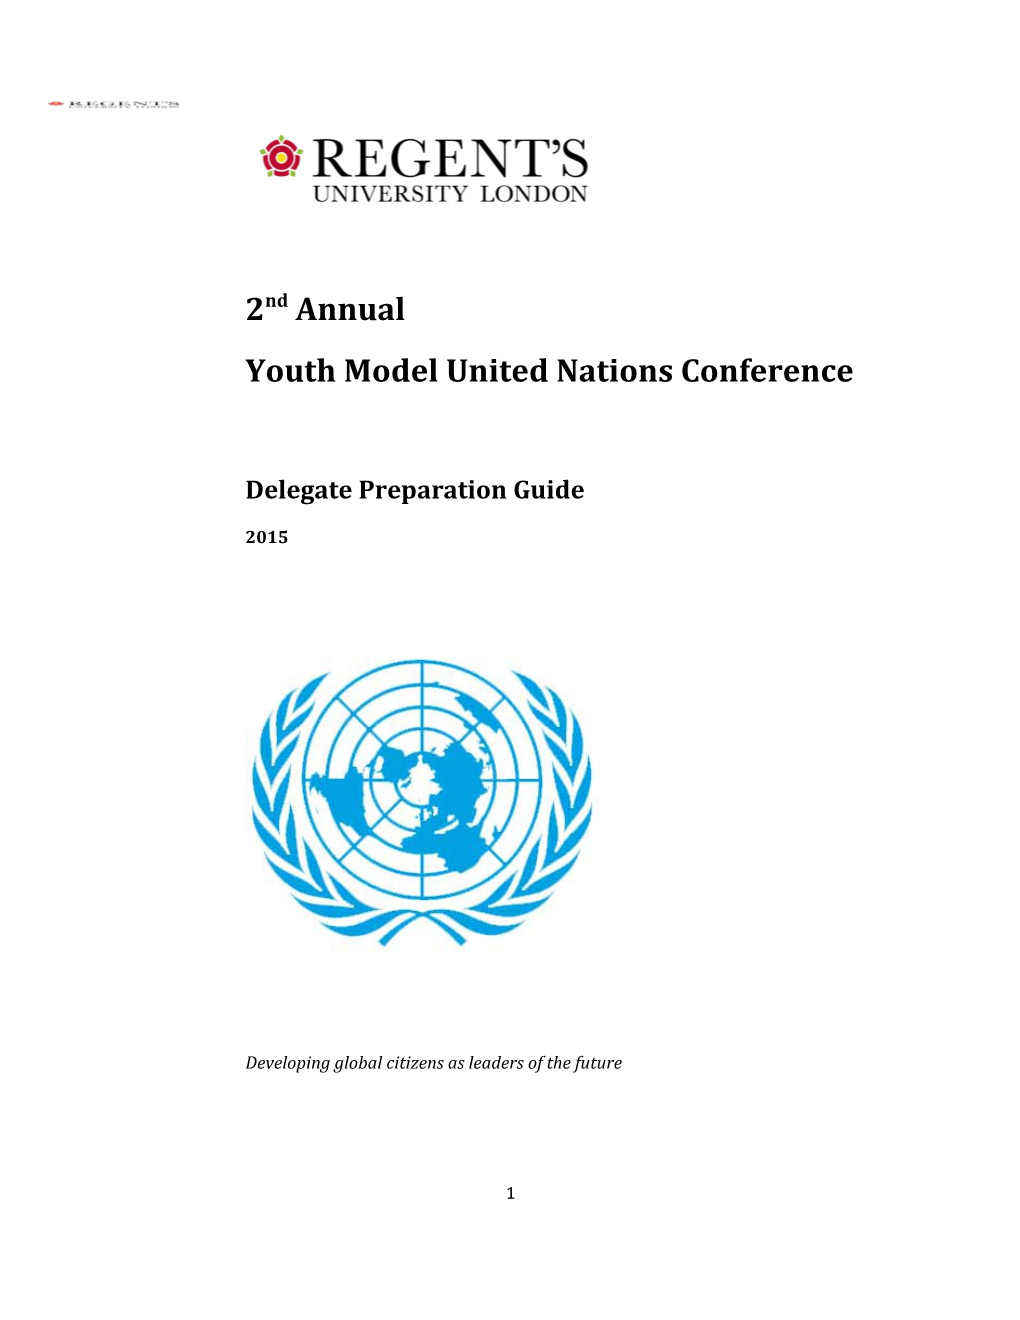 Youth Model United Nations Conference